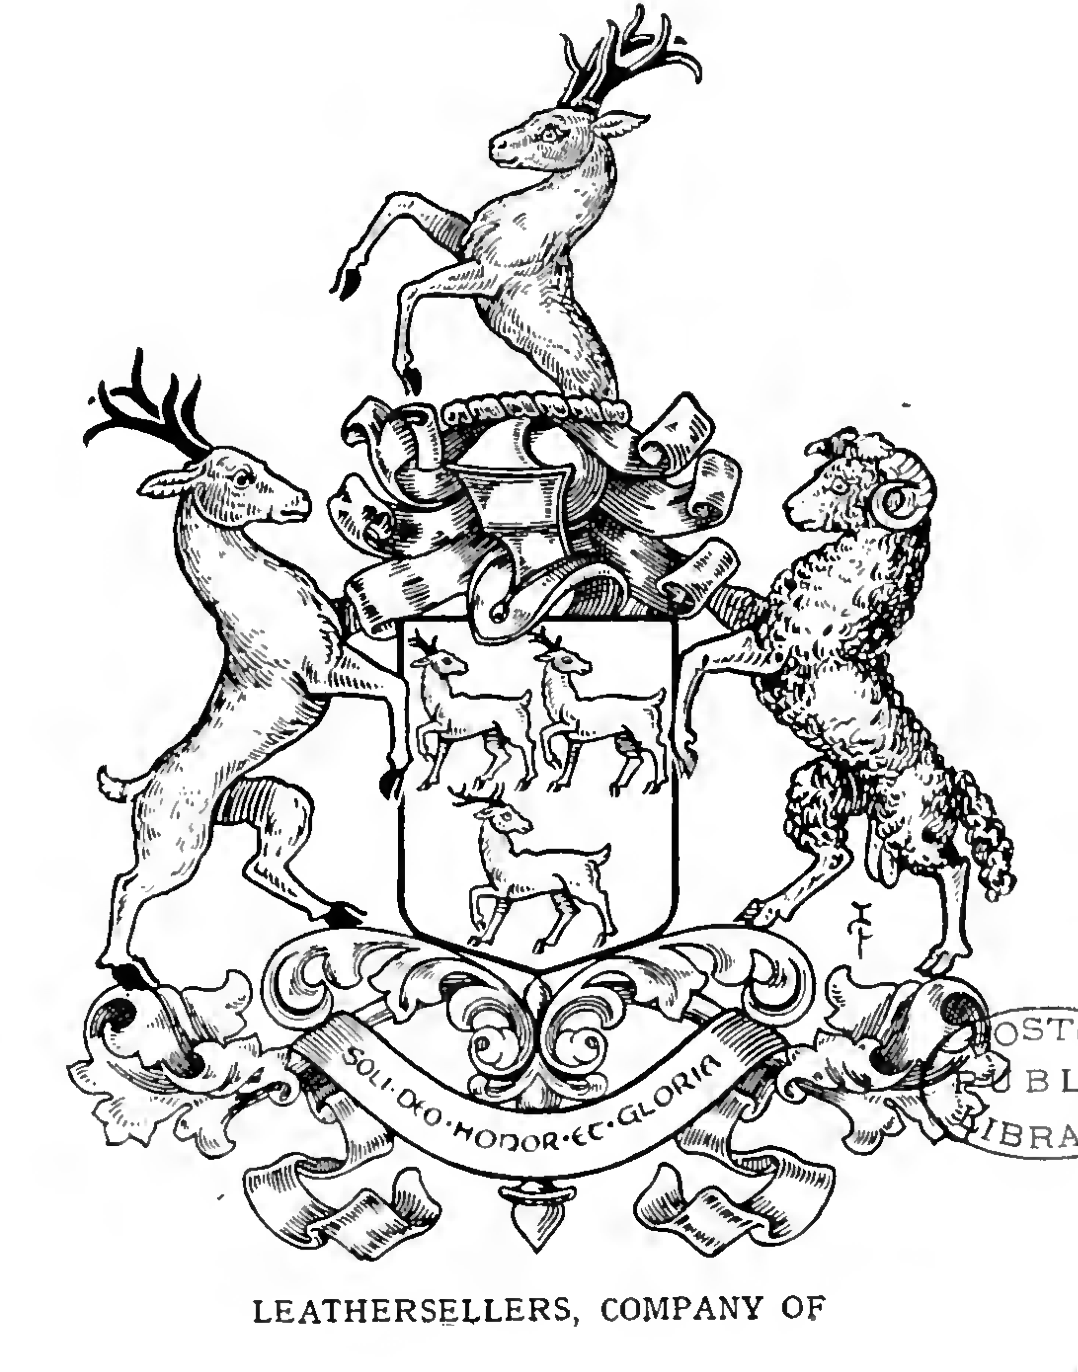 LEATHERSELLERS, The Worshipful Company of, London,